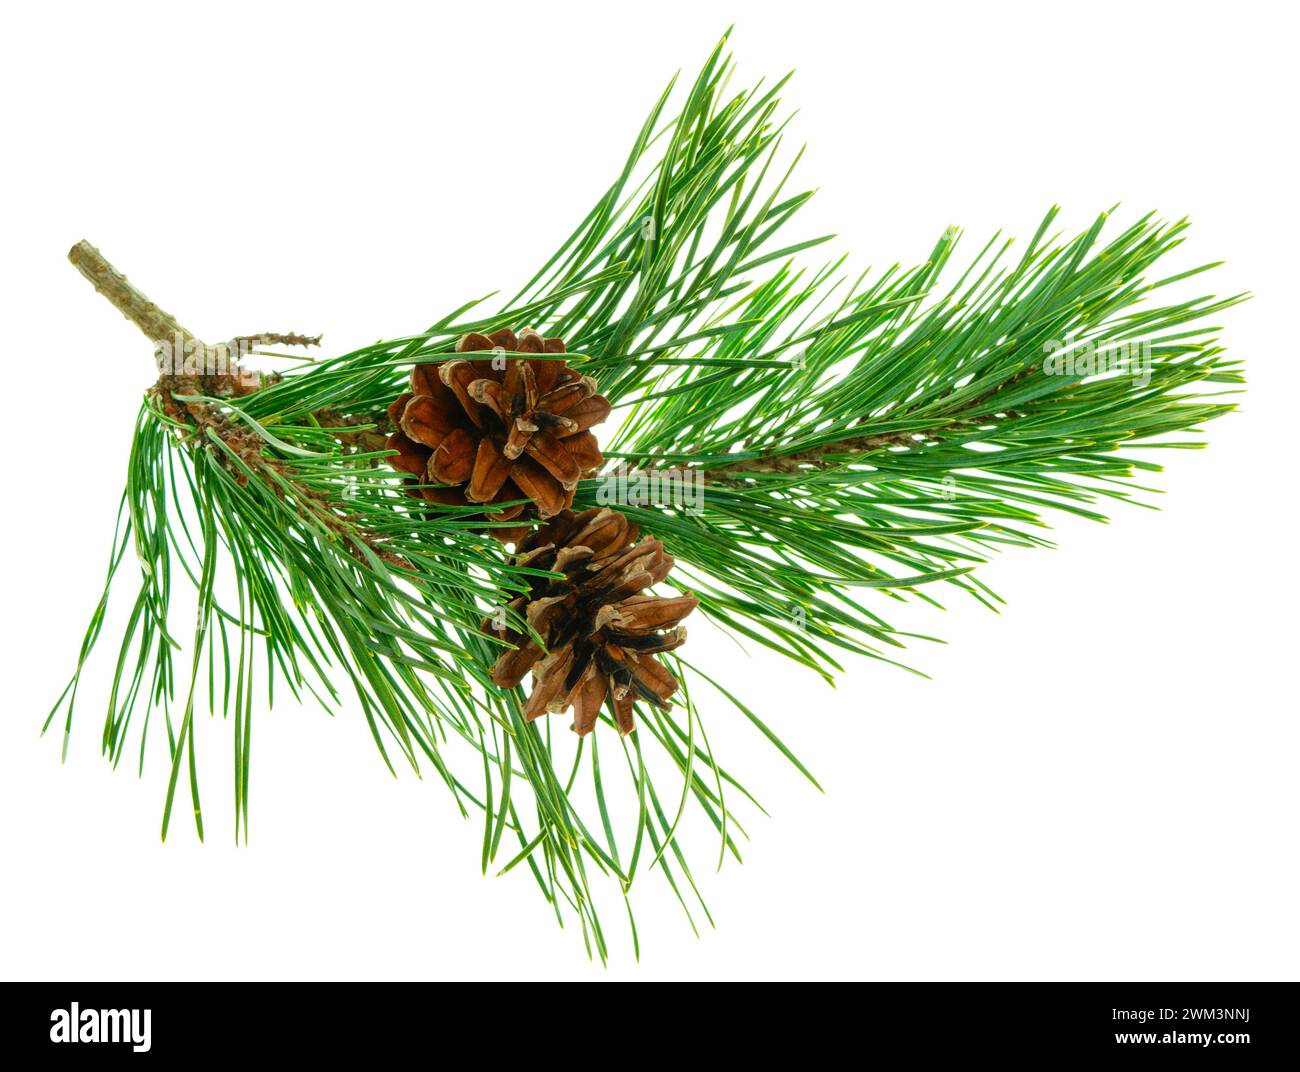 Cones on a branch isolated on white. Spruce branch with cones. Young pine cone on a green tree branch. Coniferous evergreen bumps with fruits. Christm Stock Photo